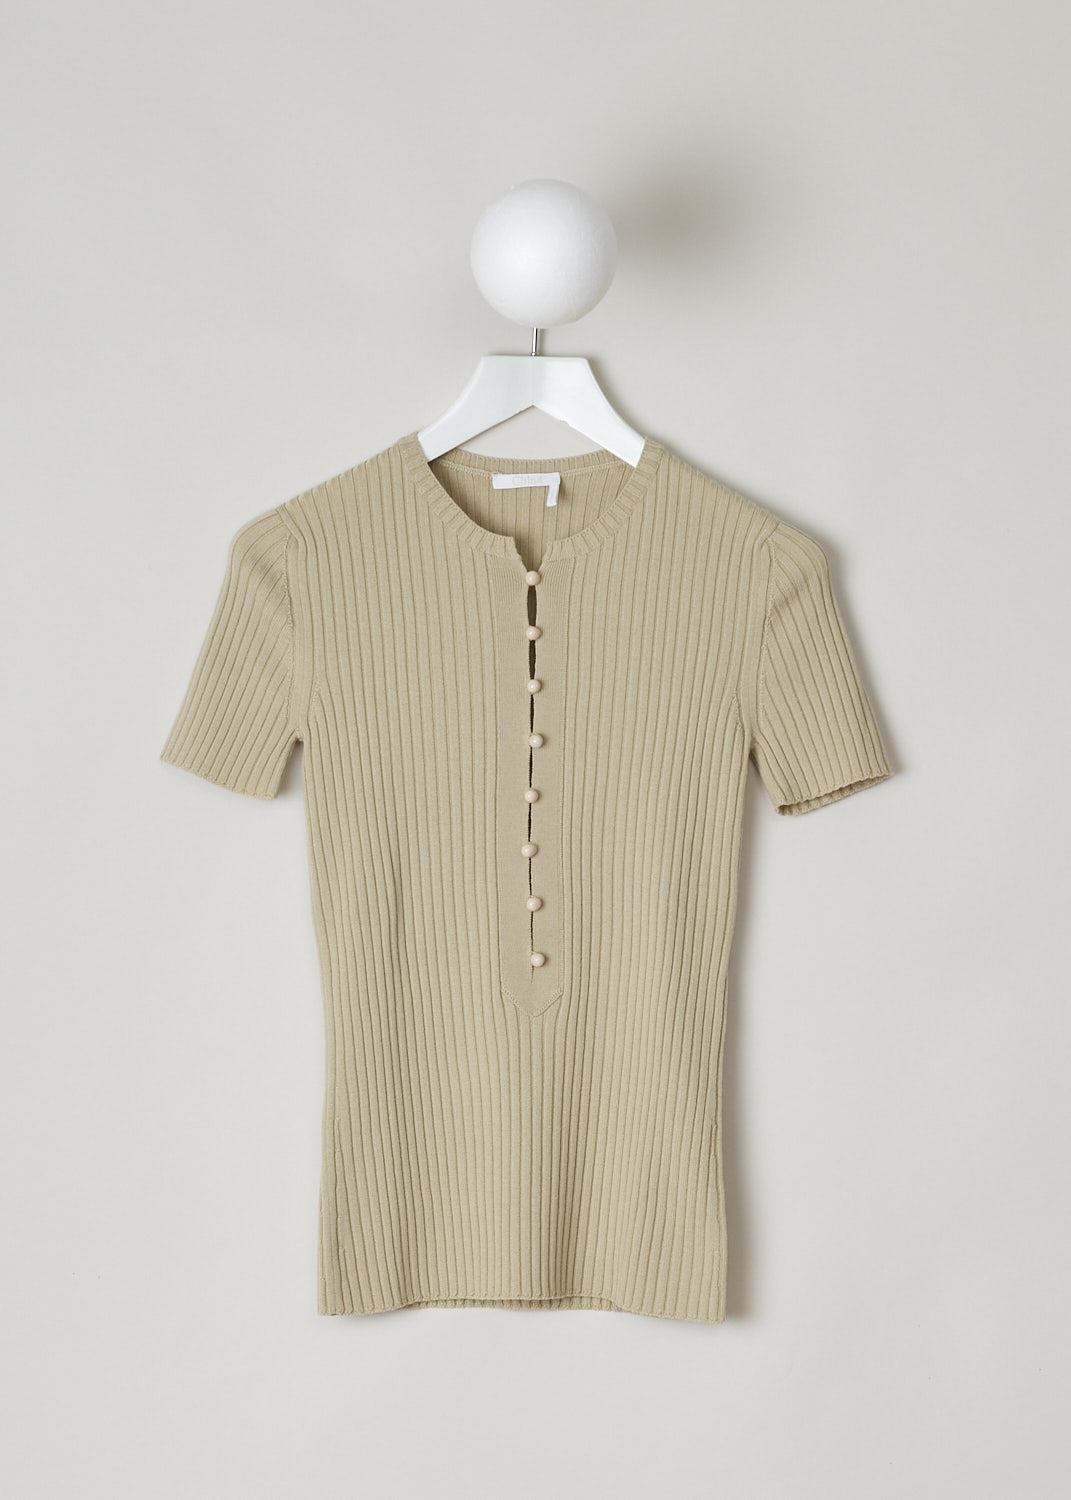 CHLOÃ‰, BEIGE RIBBED TOP, CHC22UMP3865020M_PASTEL_PINK, Beige, Front, This beige ribbed top has a round neckline, short sleeves and a placket with functional ball buttons that go down the front to about midway. The top has an elongated cut.
